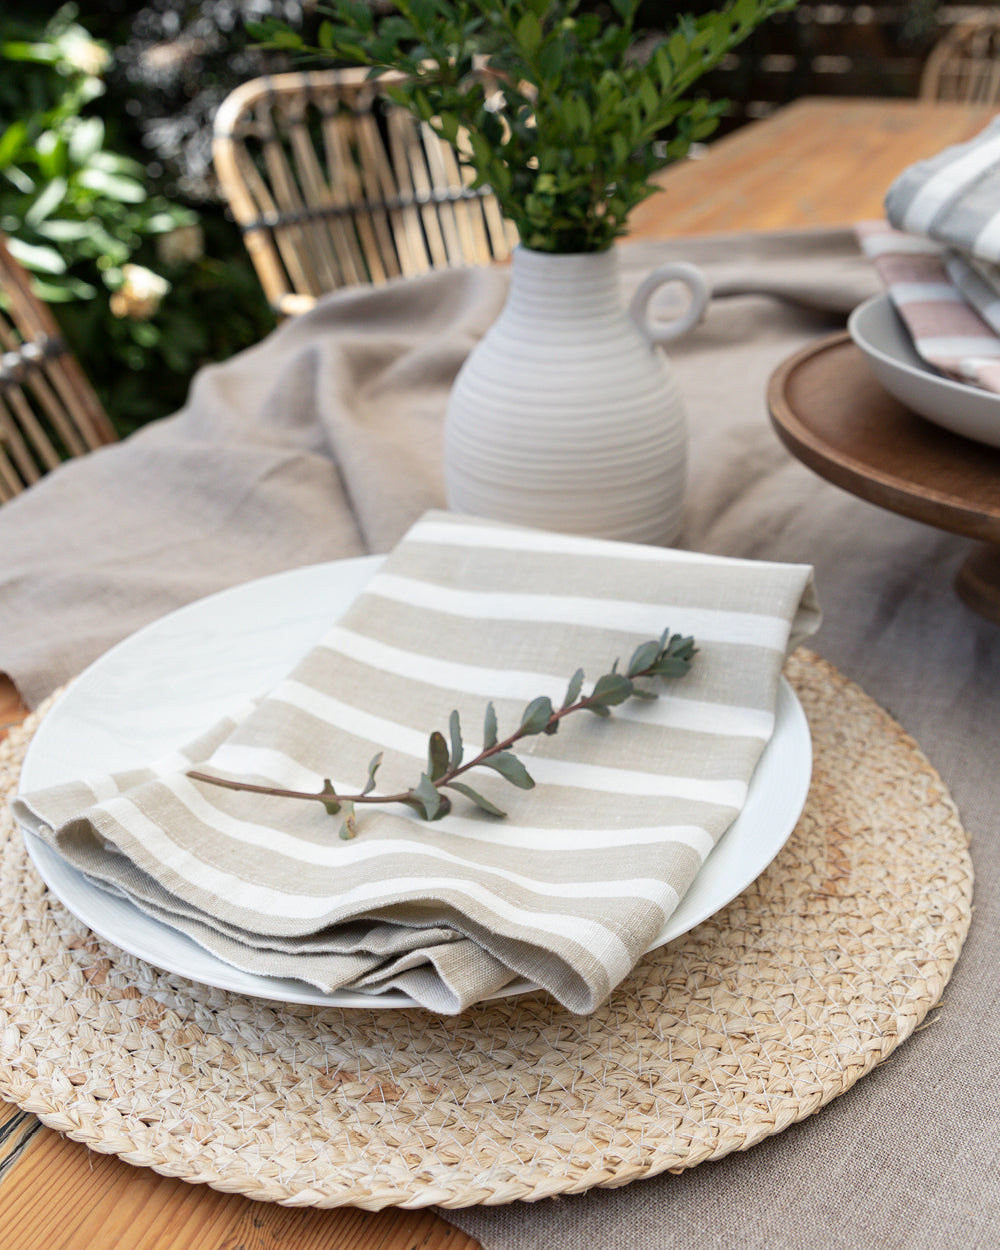 Marisol beige striped napkins sitting on table setting 